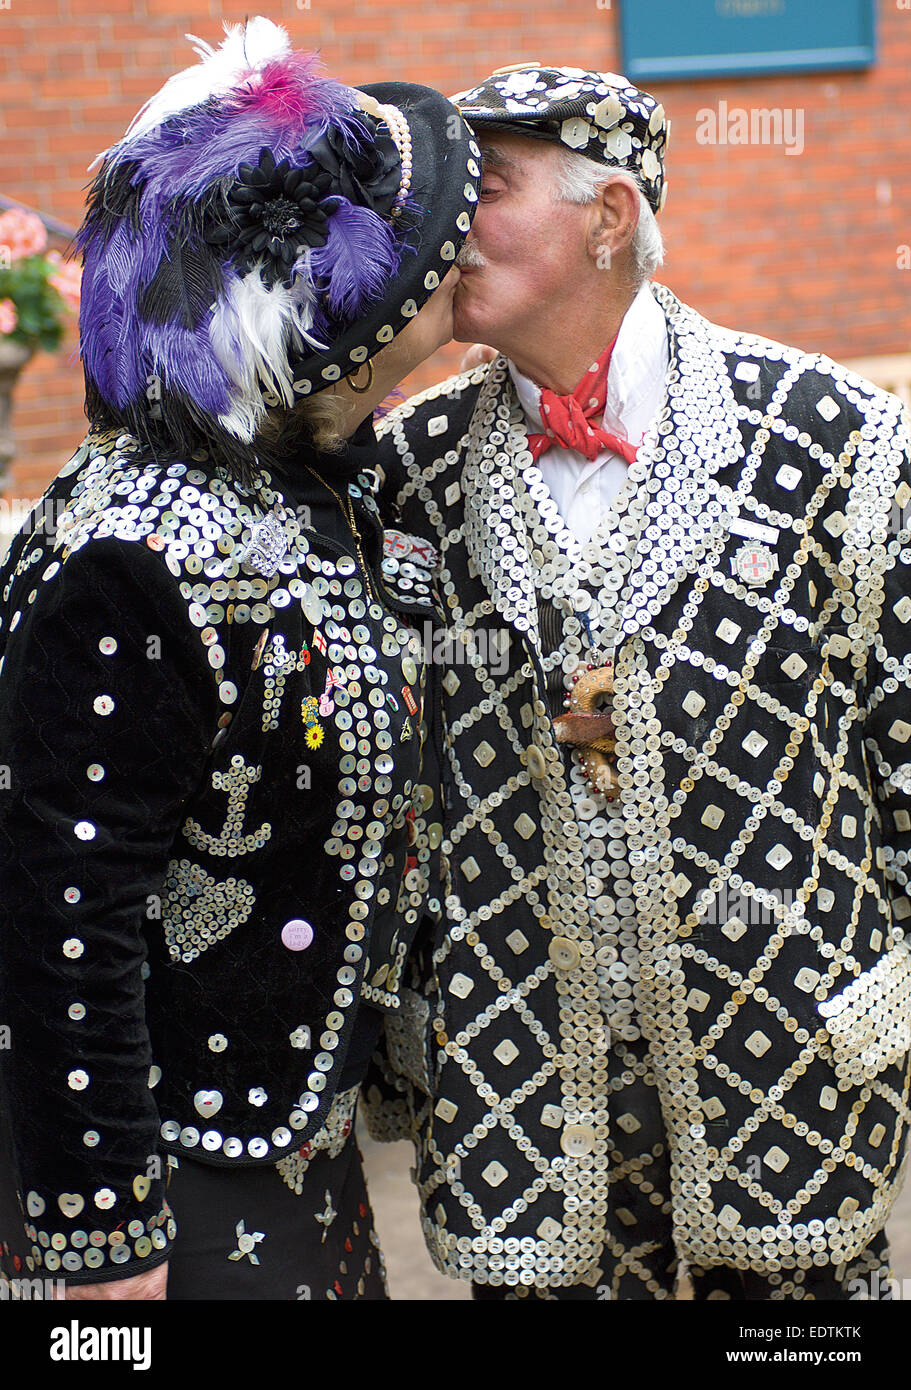 A Pearly King and Queen kiss each other before the Harvest Festival service.at St. Paul's Church, Covent Garden. Stock Photo